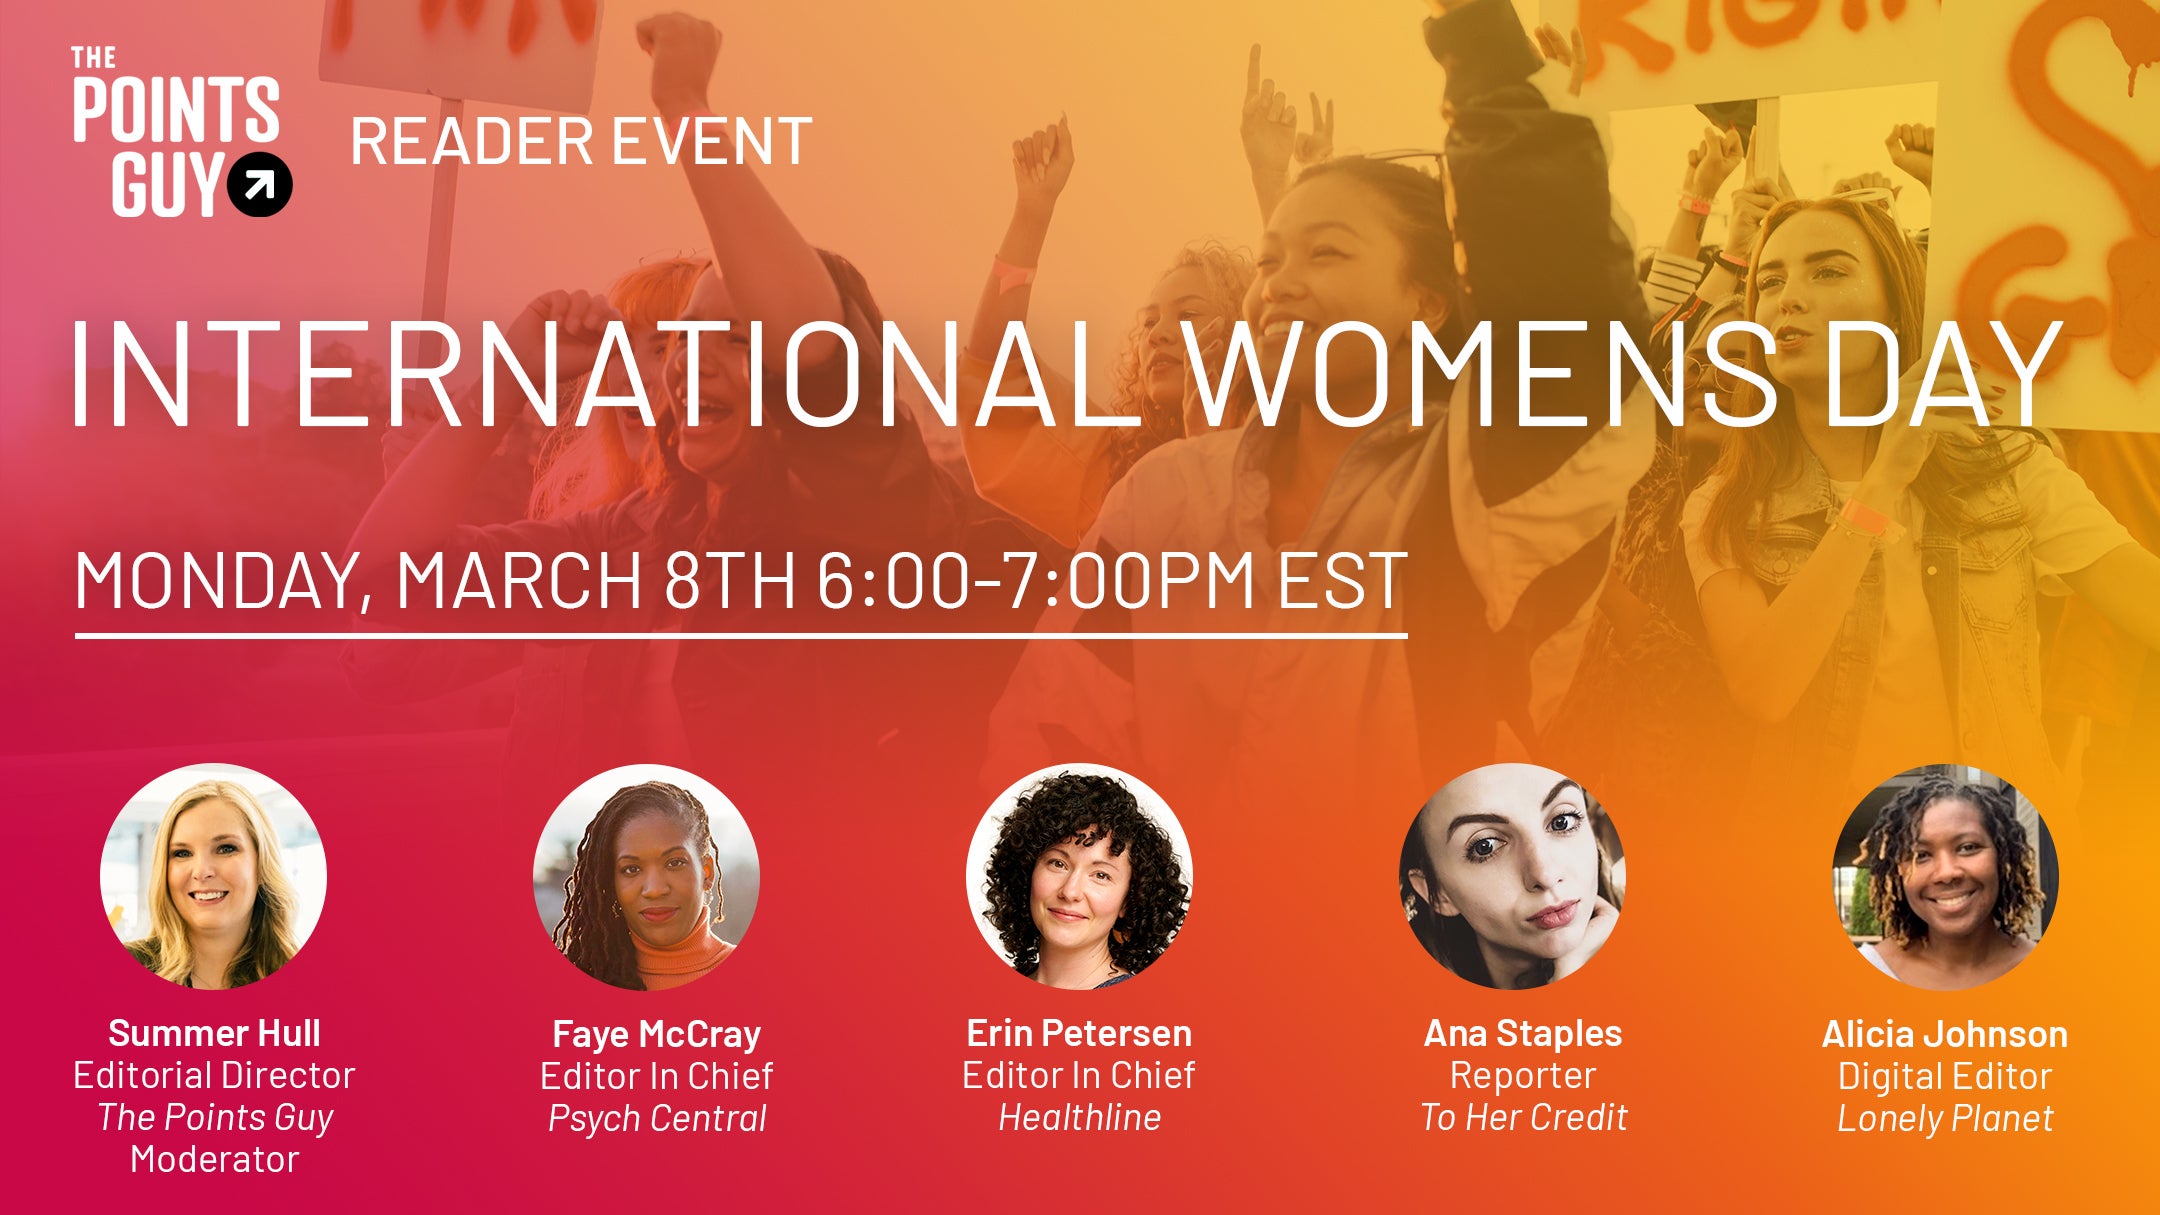 Join us for trivia, giveaways and more at TPG’s International Women’s Day reader event